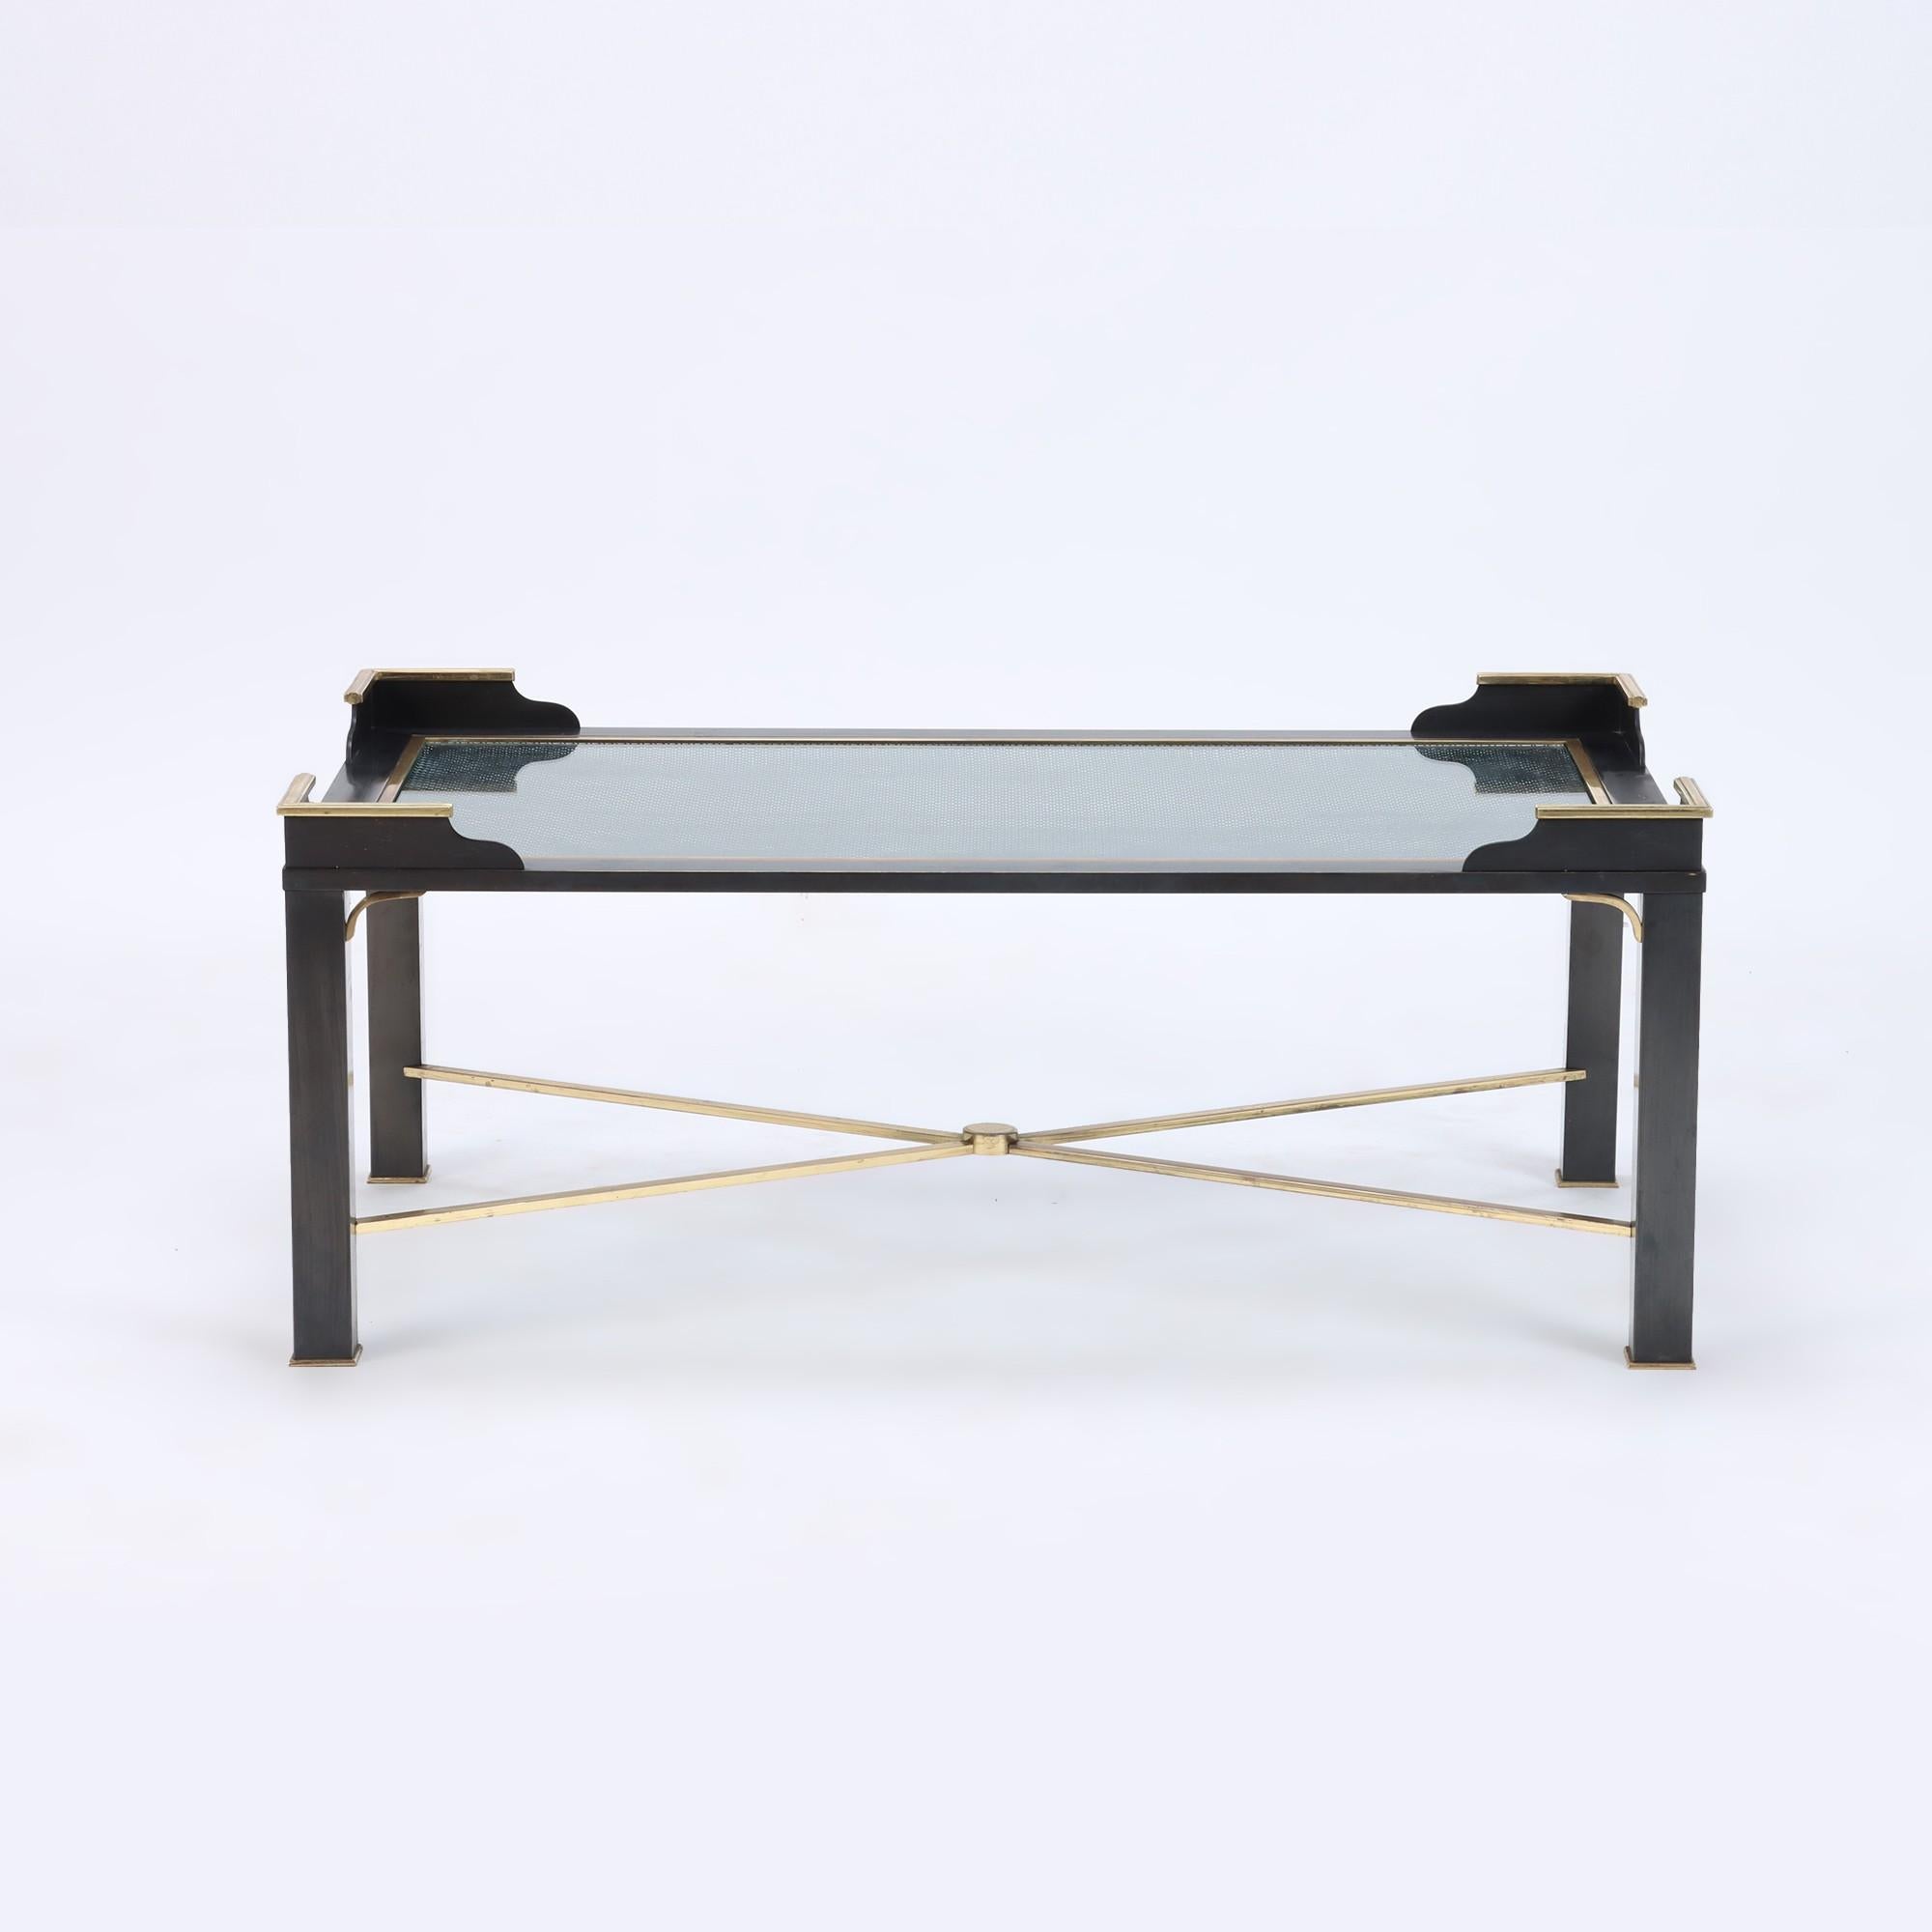 A very rare pair of two tone bronze coffee tables attributed to Jansen, having glass tops over brass mesh details. C 1970.